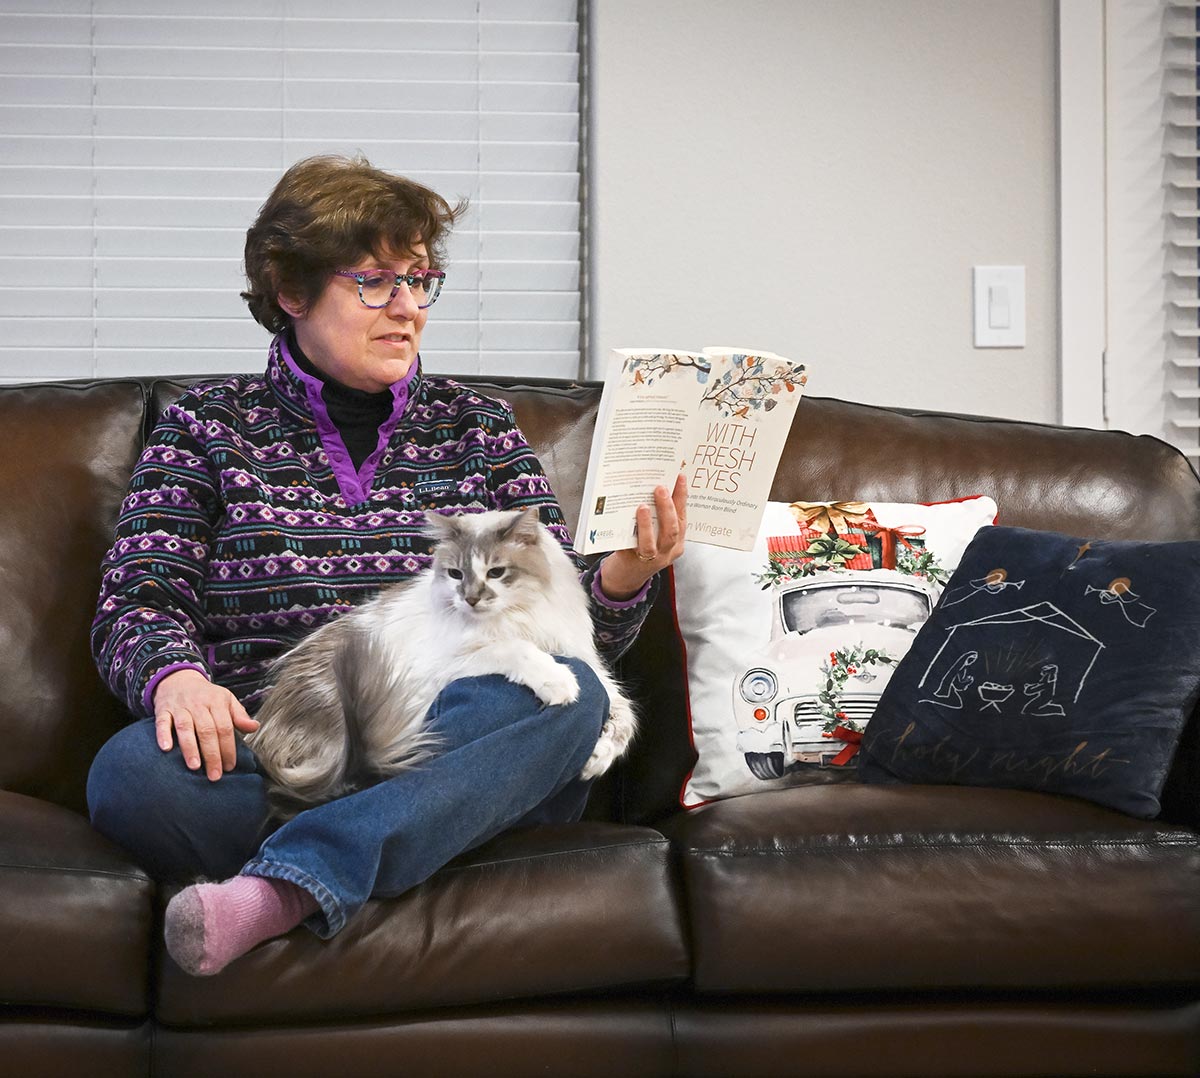 Susan Bergeson sitting cross-legged on the couch with a cat on her lap and reading a book